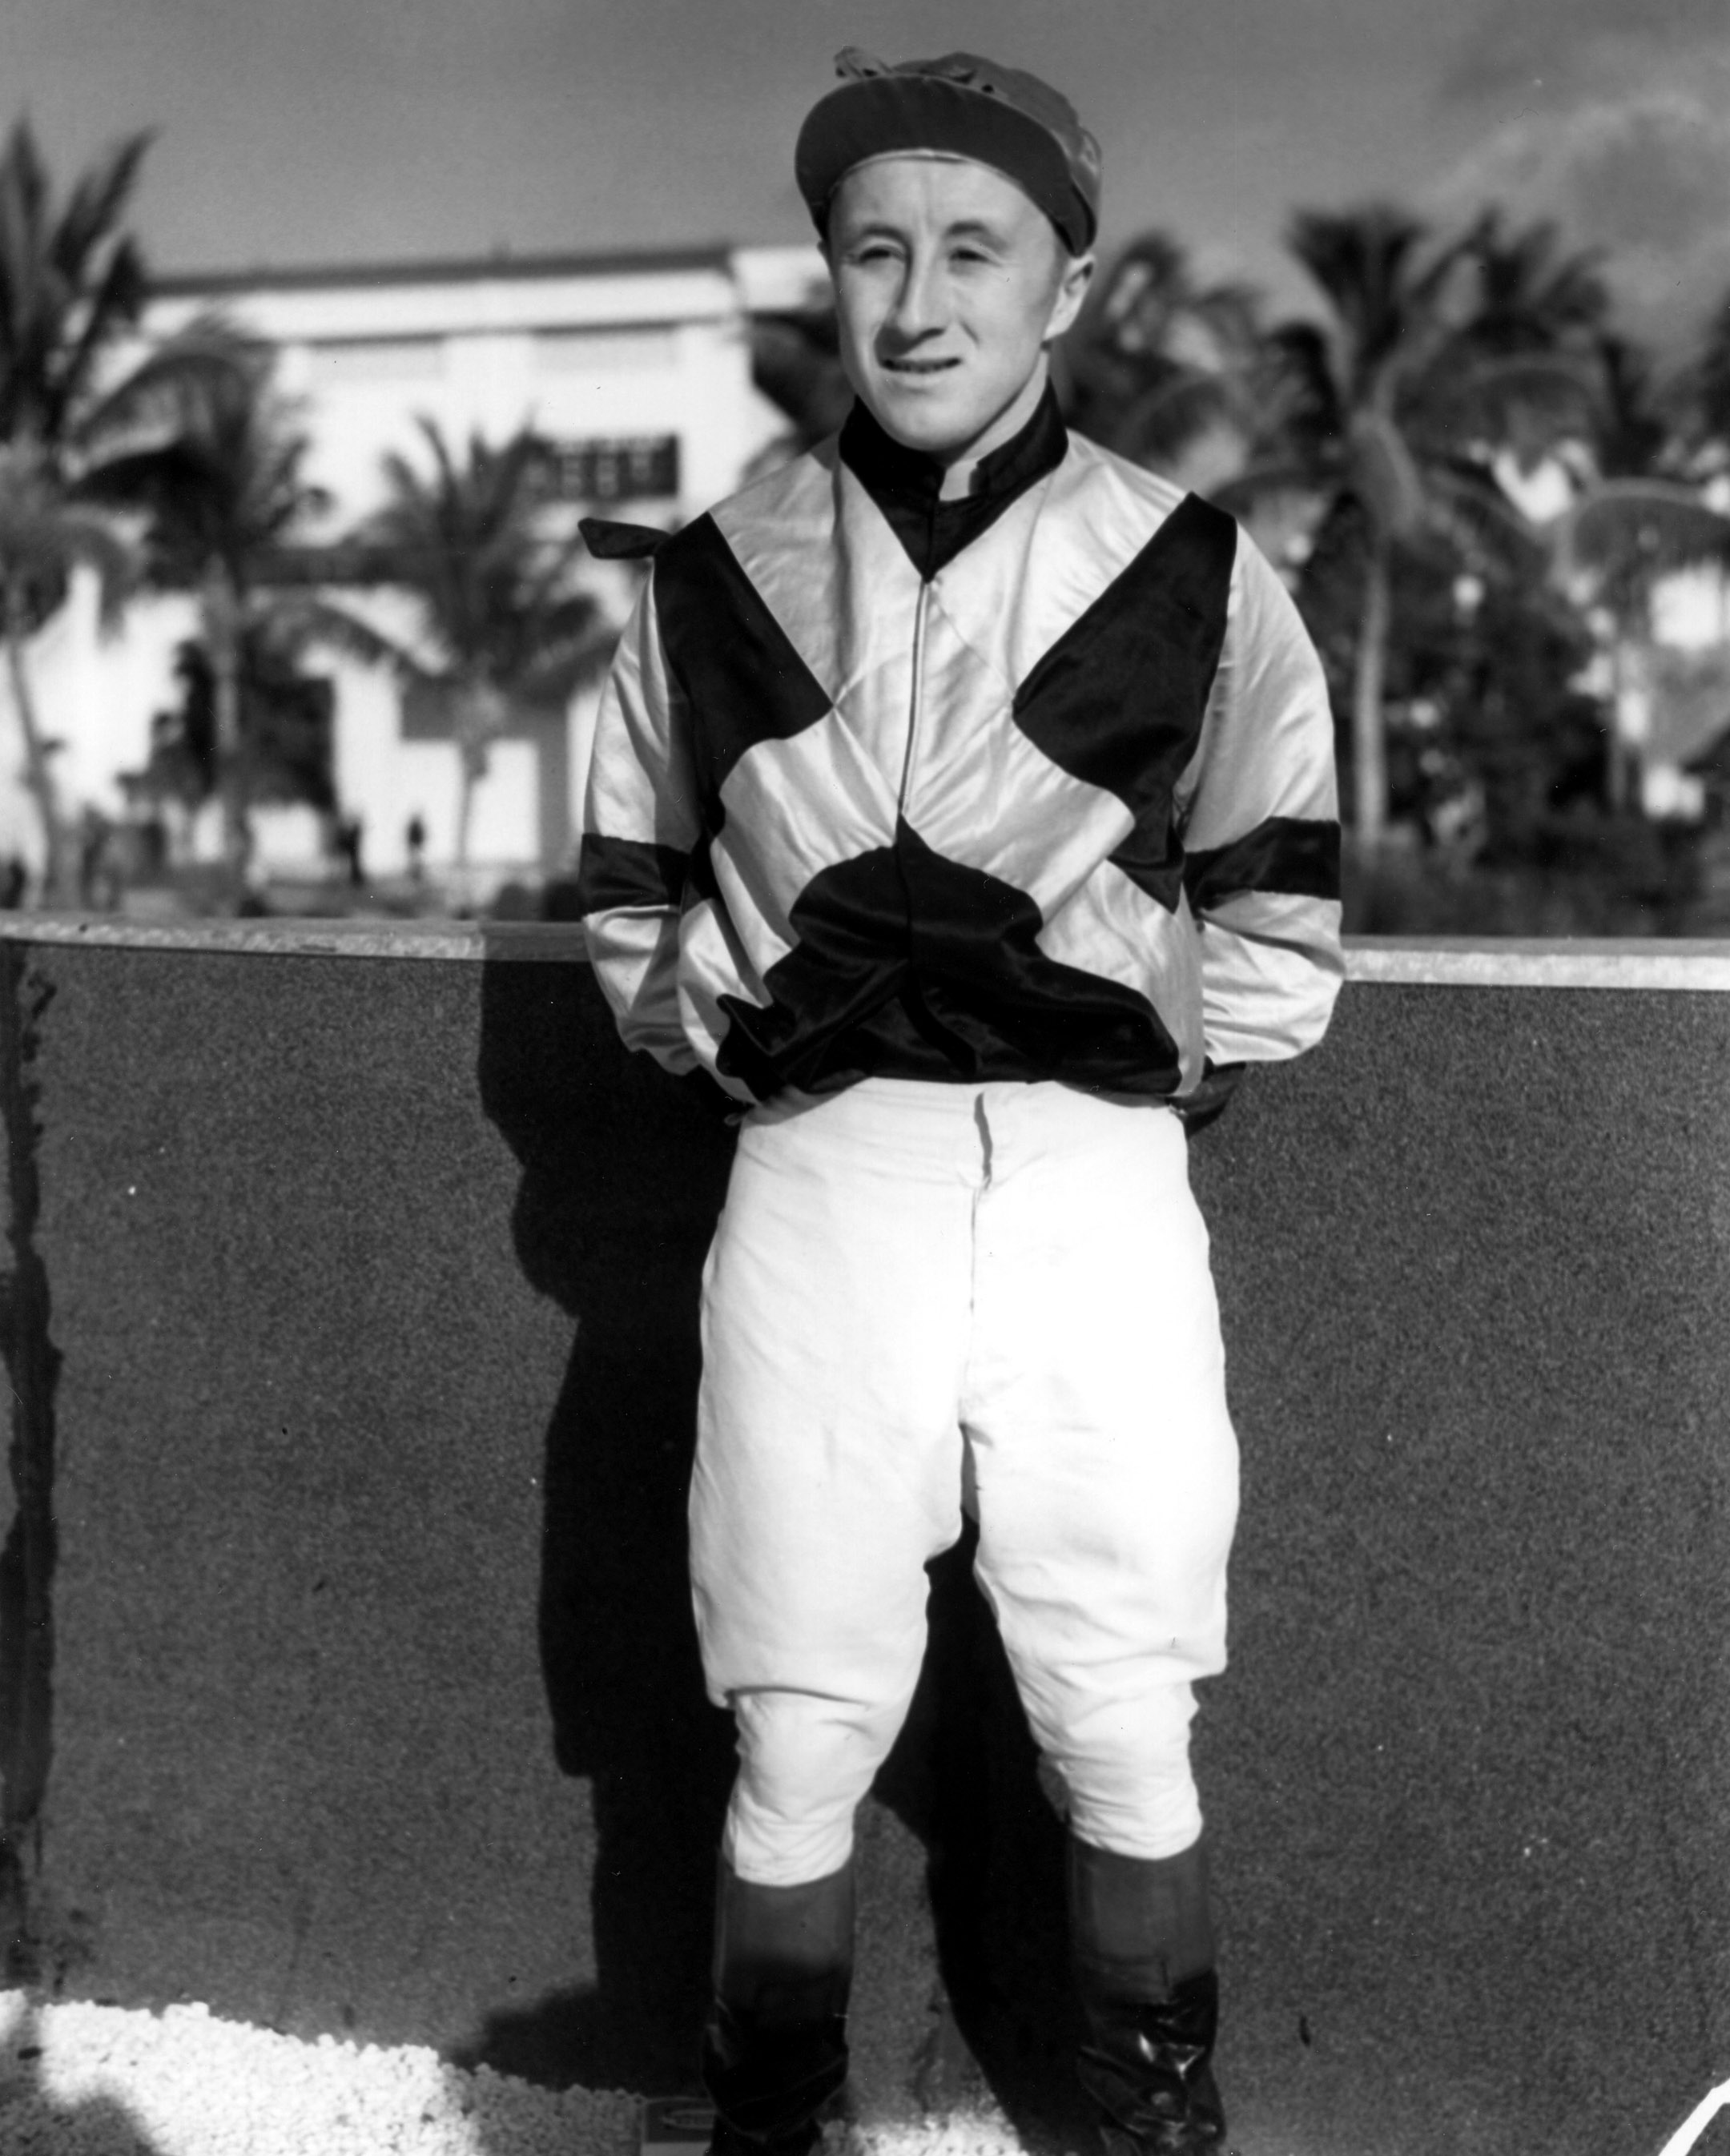 James Stout at Tropical Park (Keeneland Library Morgan Collection/Museum Collection)